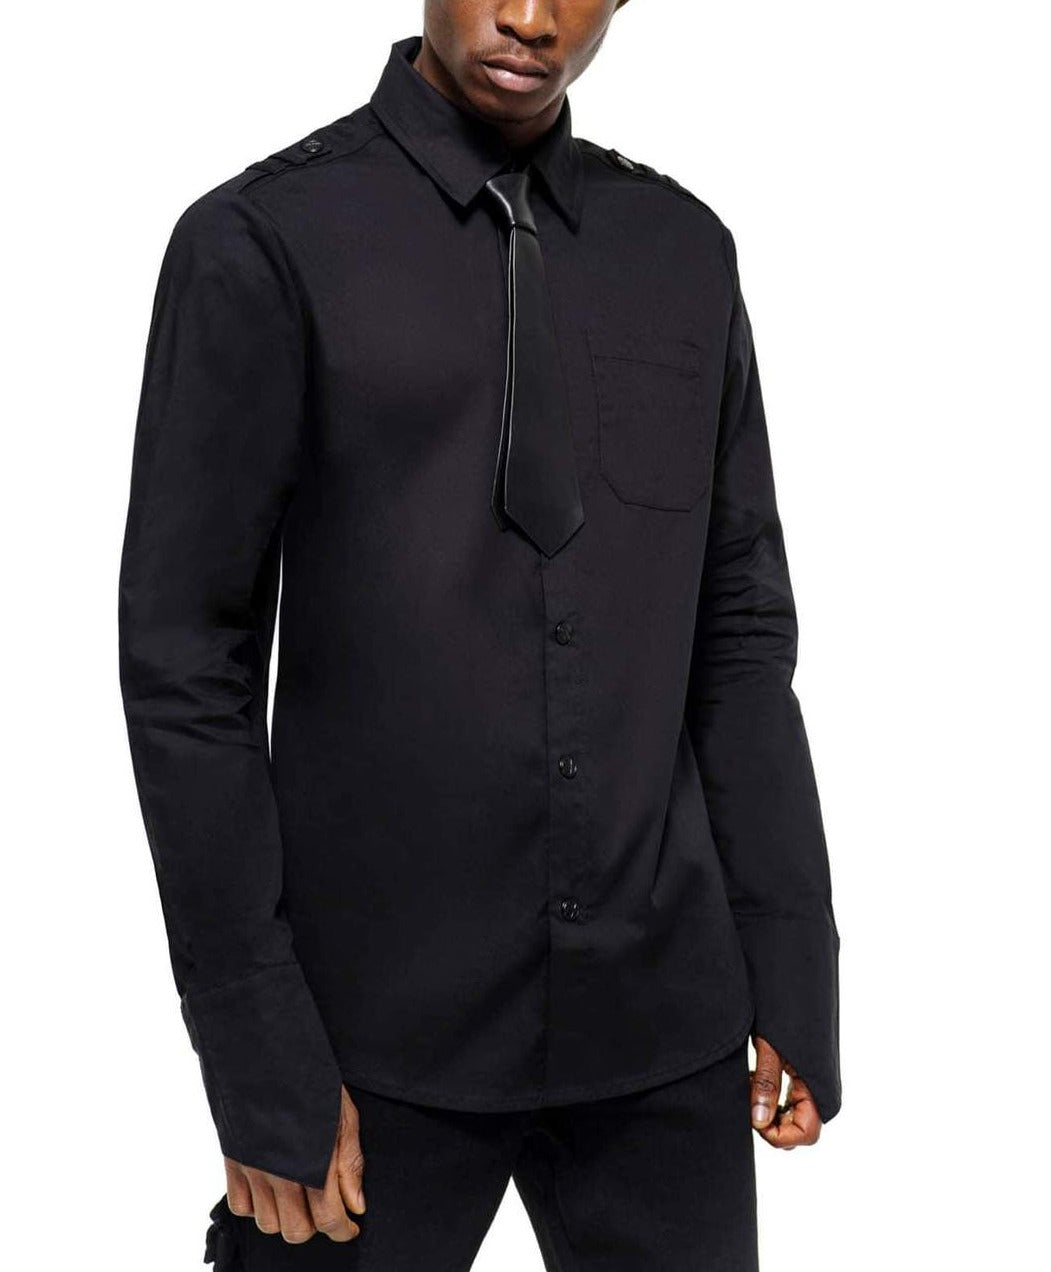 front view of black button up shirt with built on pleather tie, front pocket and extra long pointed sleeves.